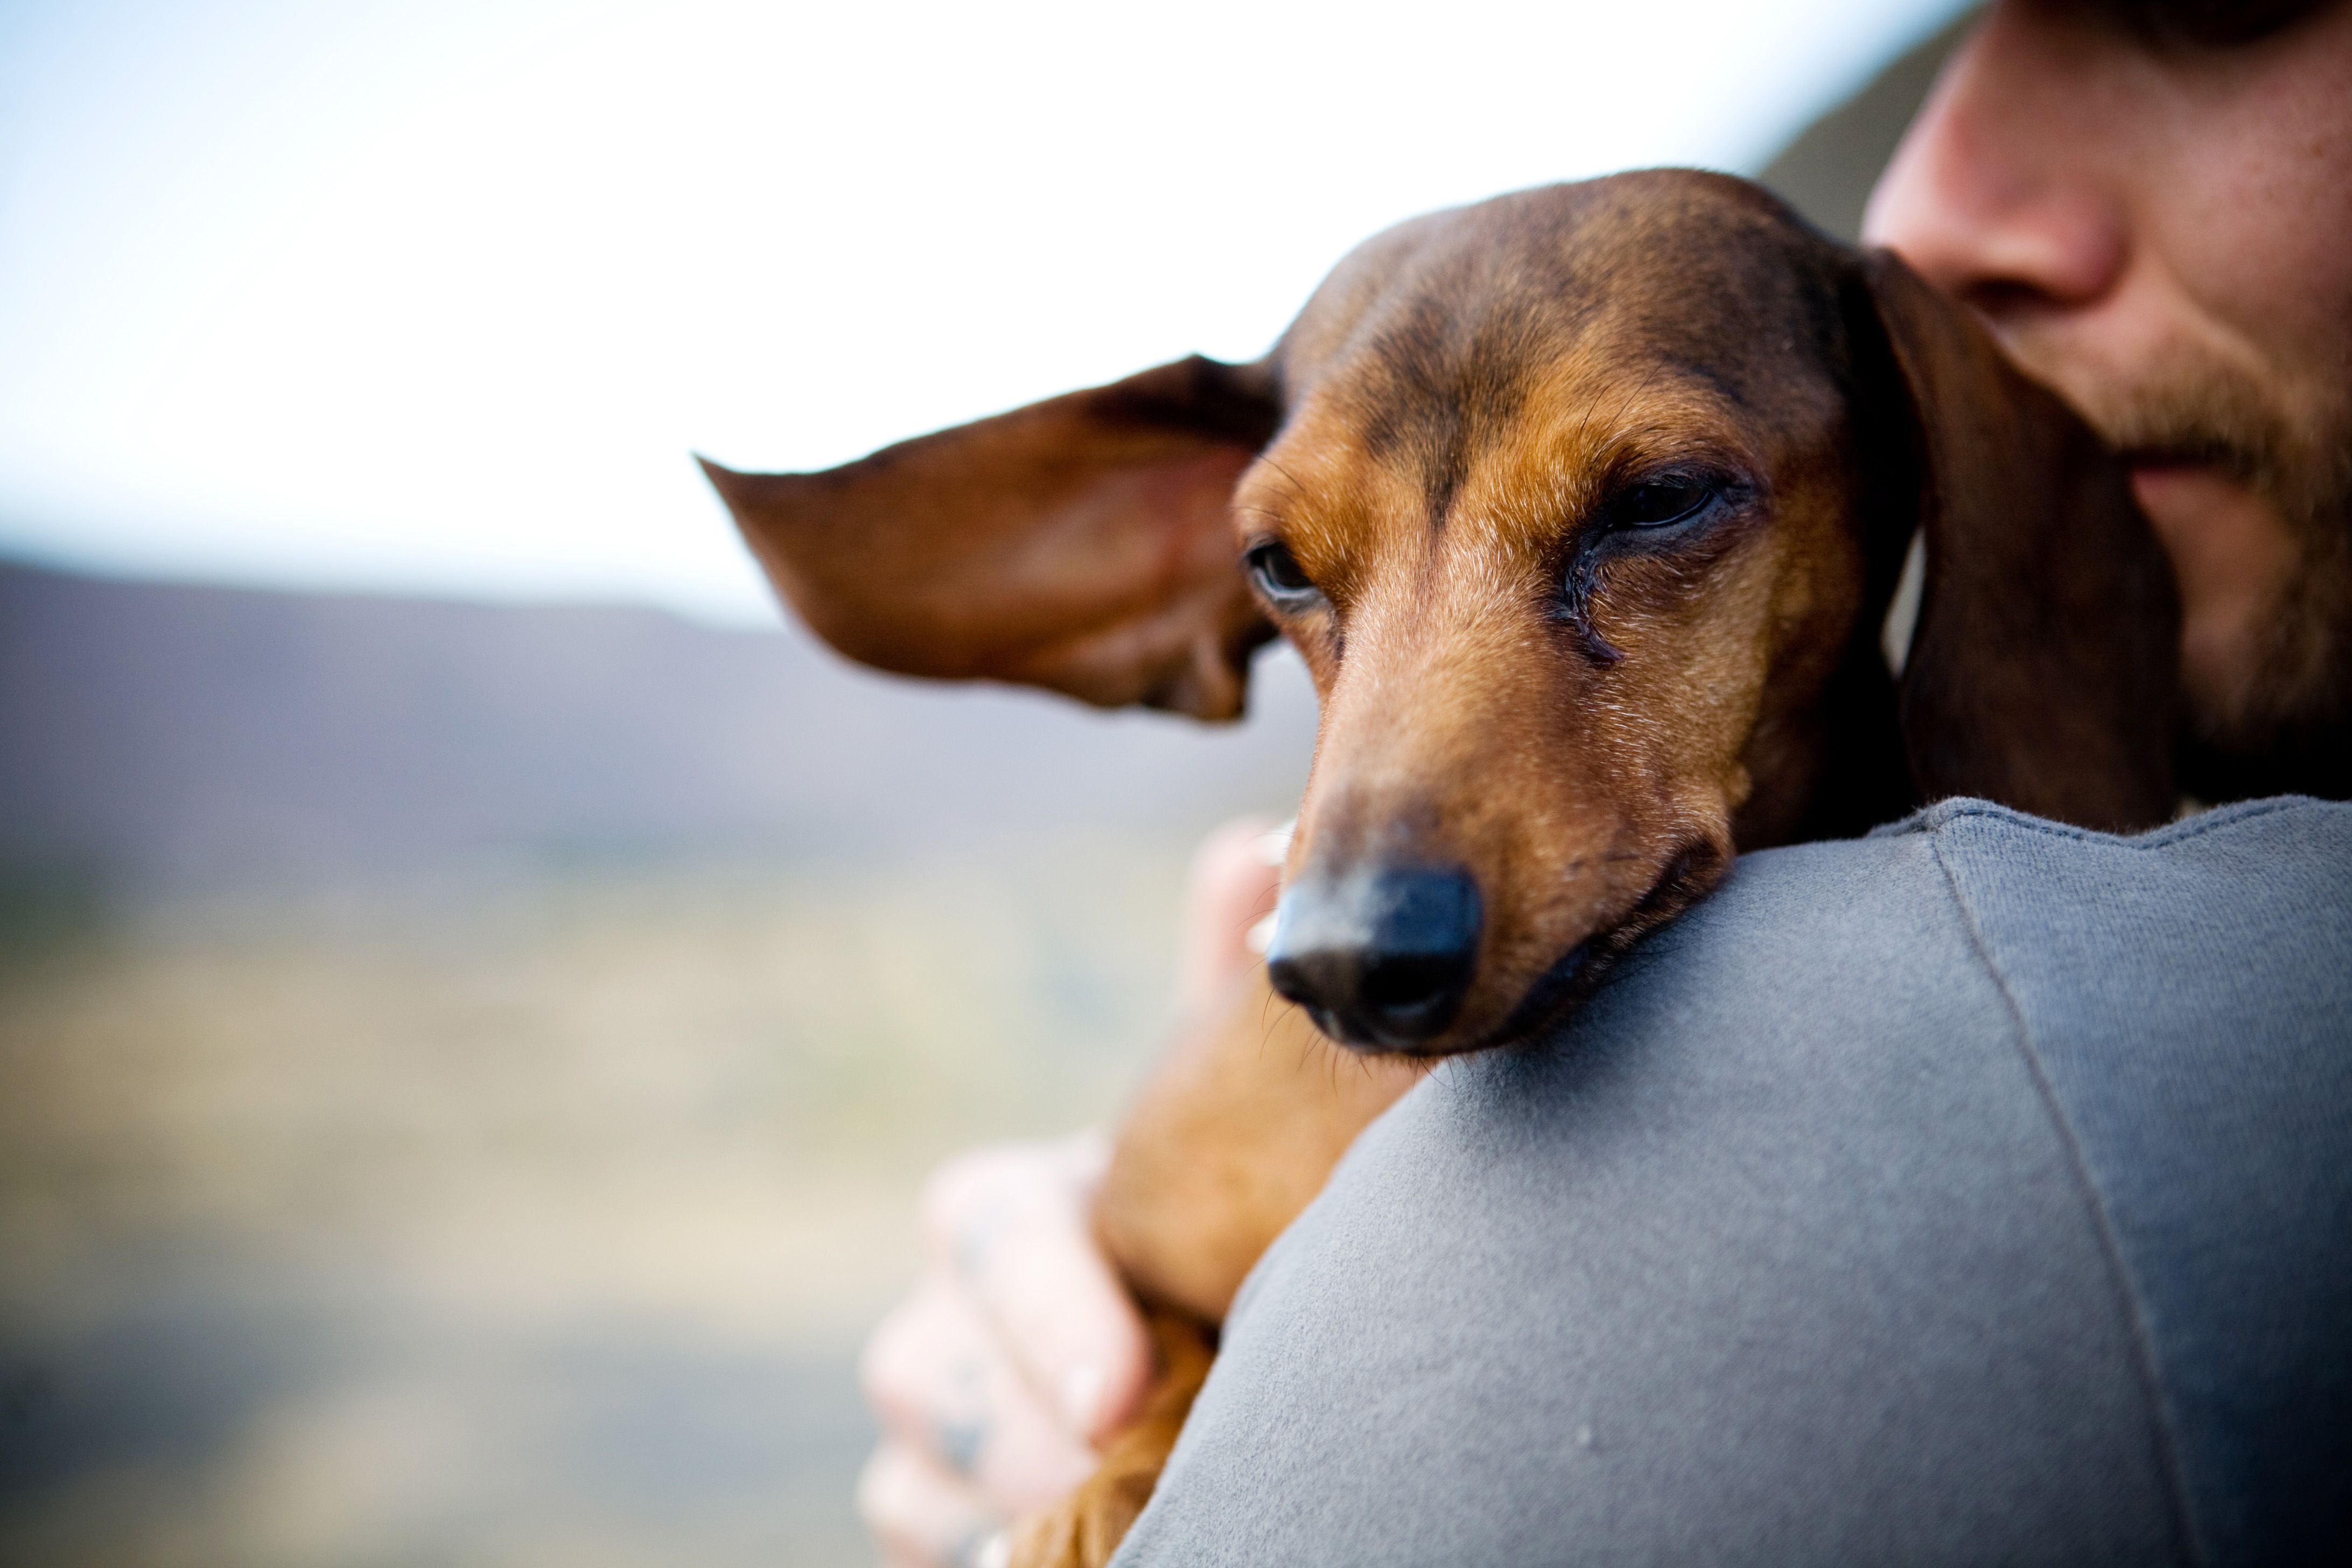 Dogs really are man's best friend, study finds